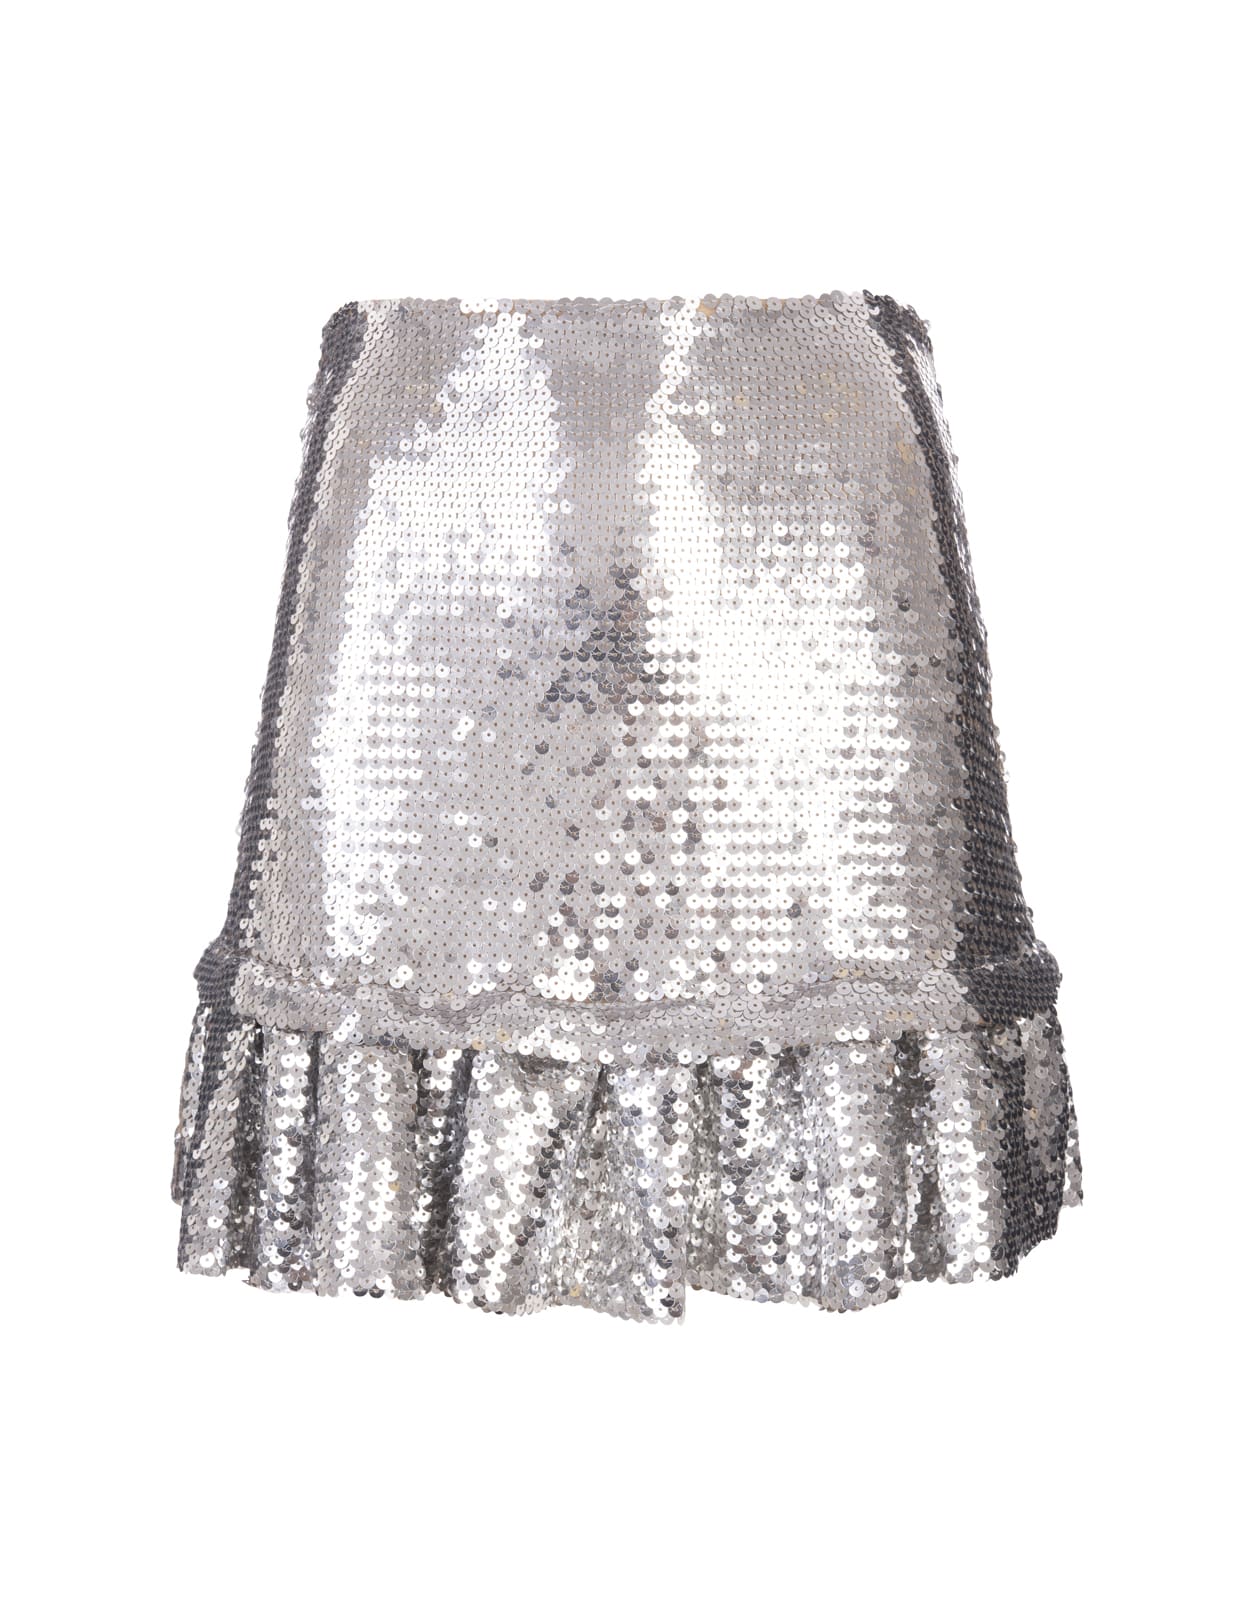 Paco Rabanne Woman Mini Skirt In Silver Sequined Fabric With Ruches